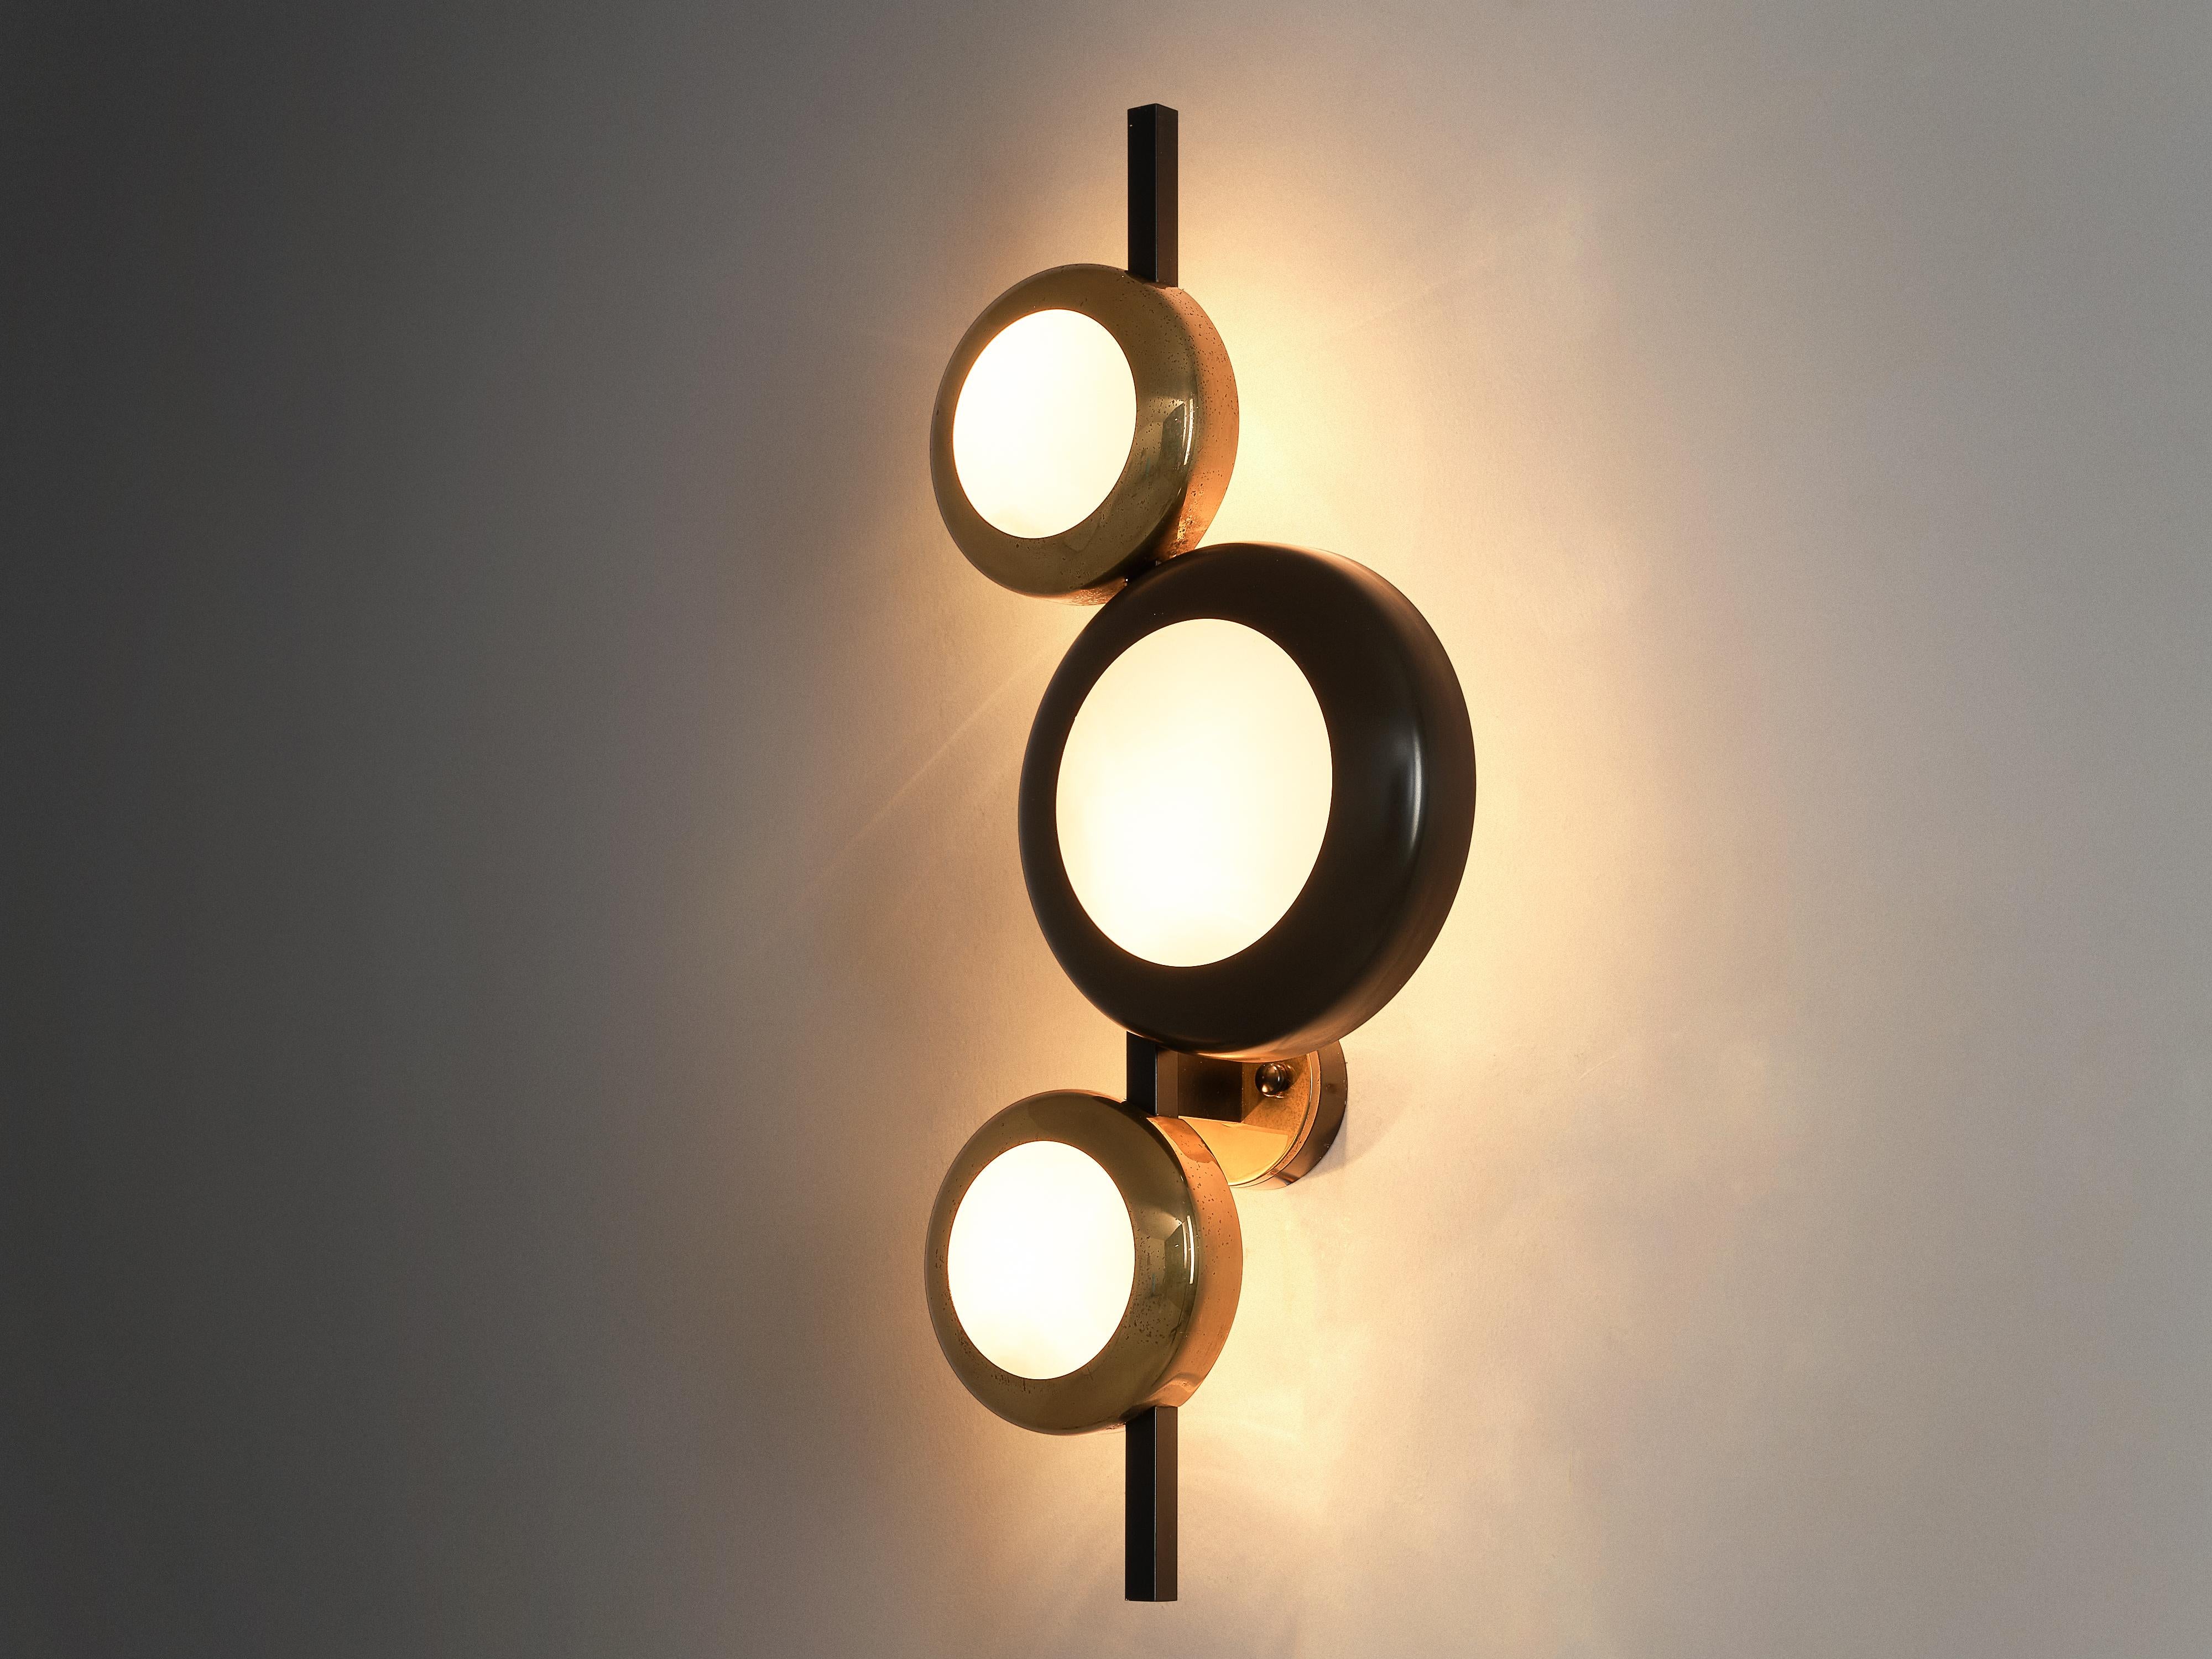 Oscar Torlasco for Lumi Milano, wall lamps, brass, glass, metal, Italy, 1950s

Admirable wall lamp by Italian designer Oscar Torlasco, manufactured by Lumi Milano. This playful lamp is designed of three round shades that open towards the wall. One